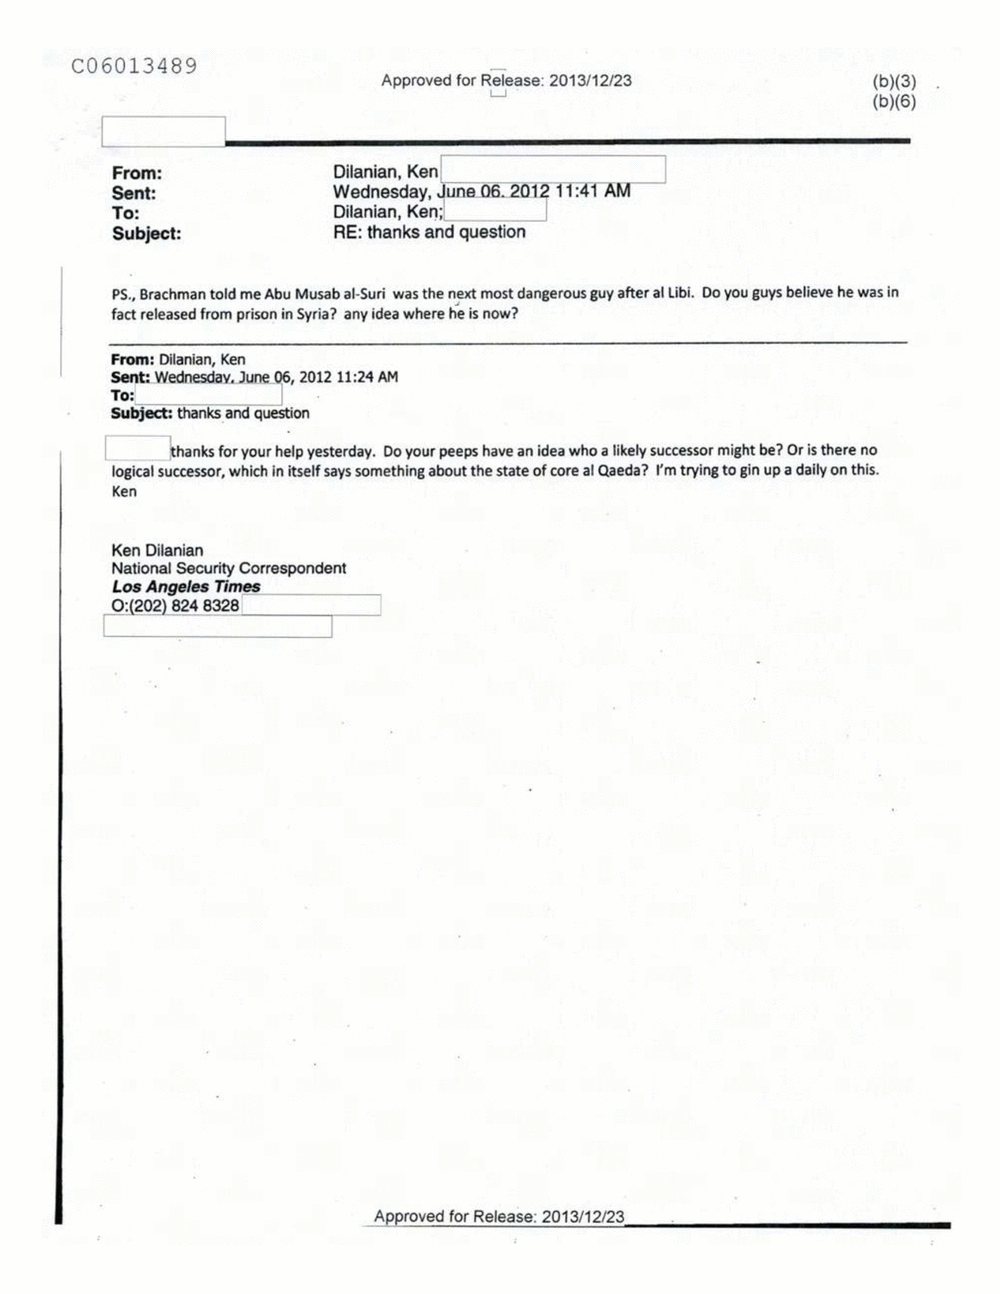 Page 341 from Email Correspondence Between Reporters and CIA Flacks